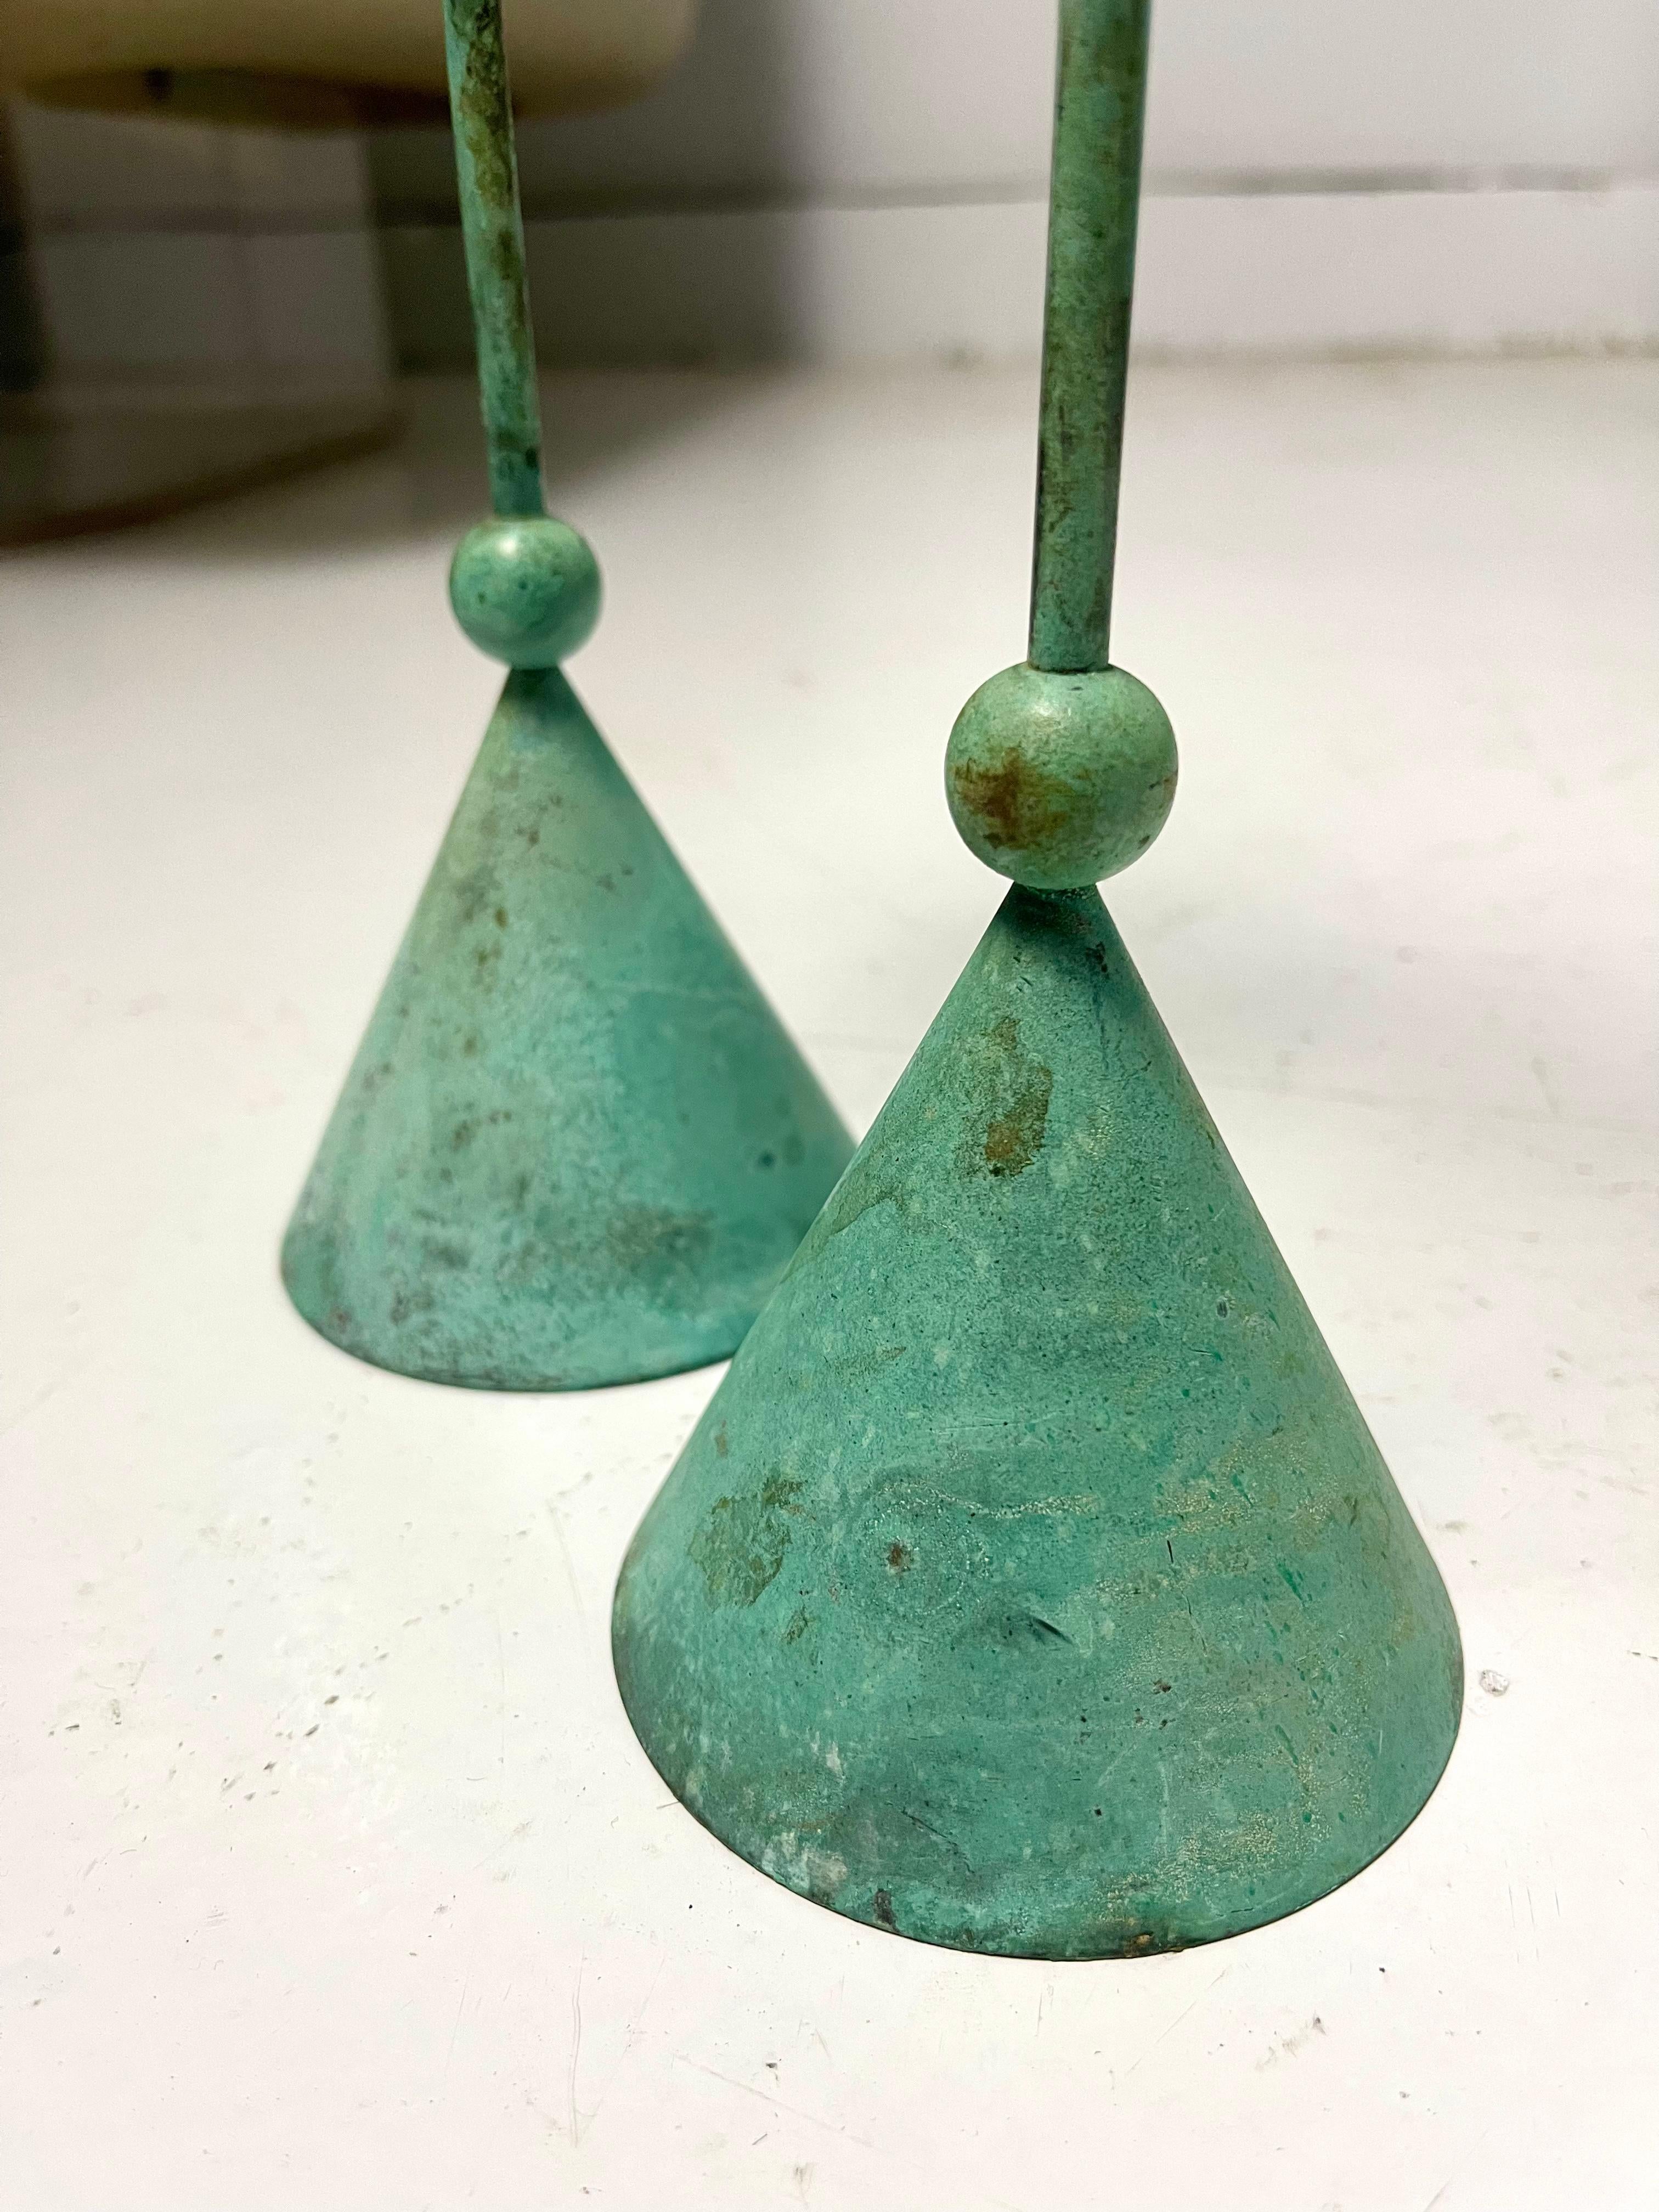 Pair of Postmodern candle holders with a gorgeous Verdigris patina. Beautiful mix of postmodern and ancient fits into any interior with ease and adds instant character.